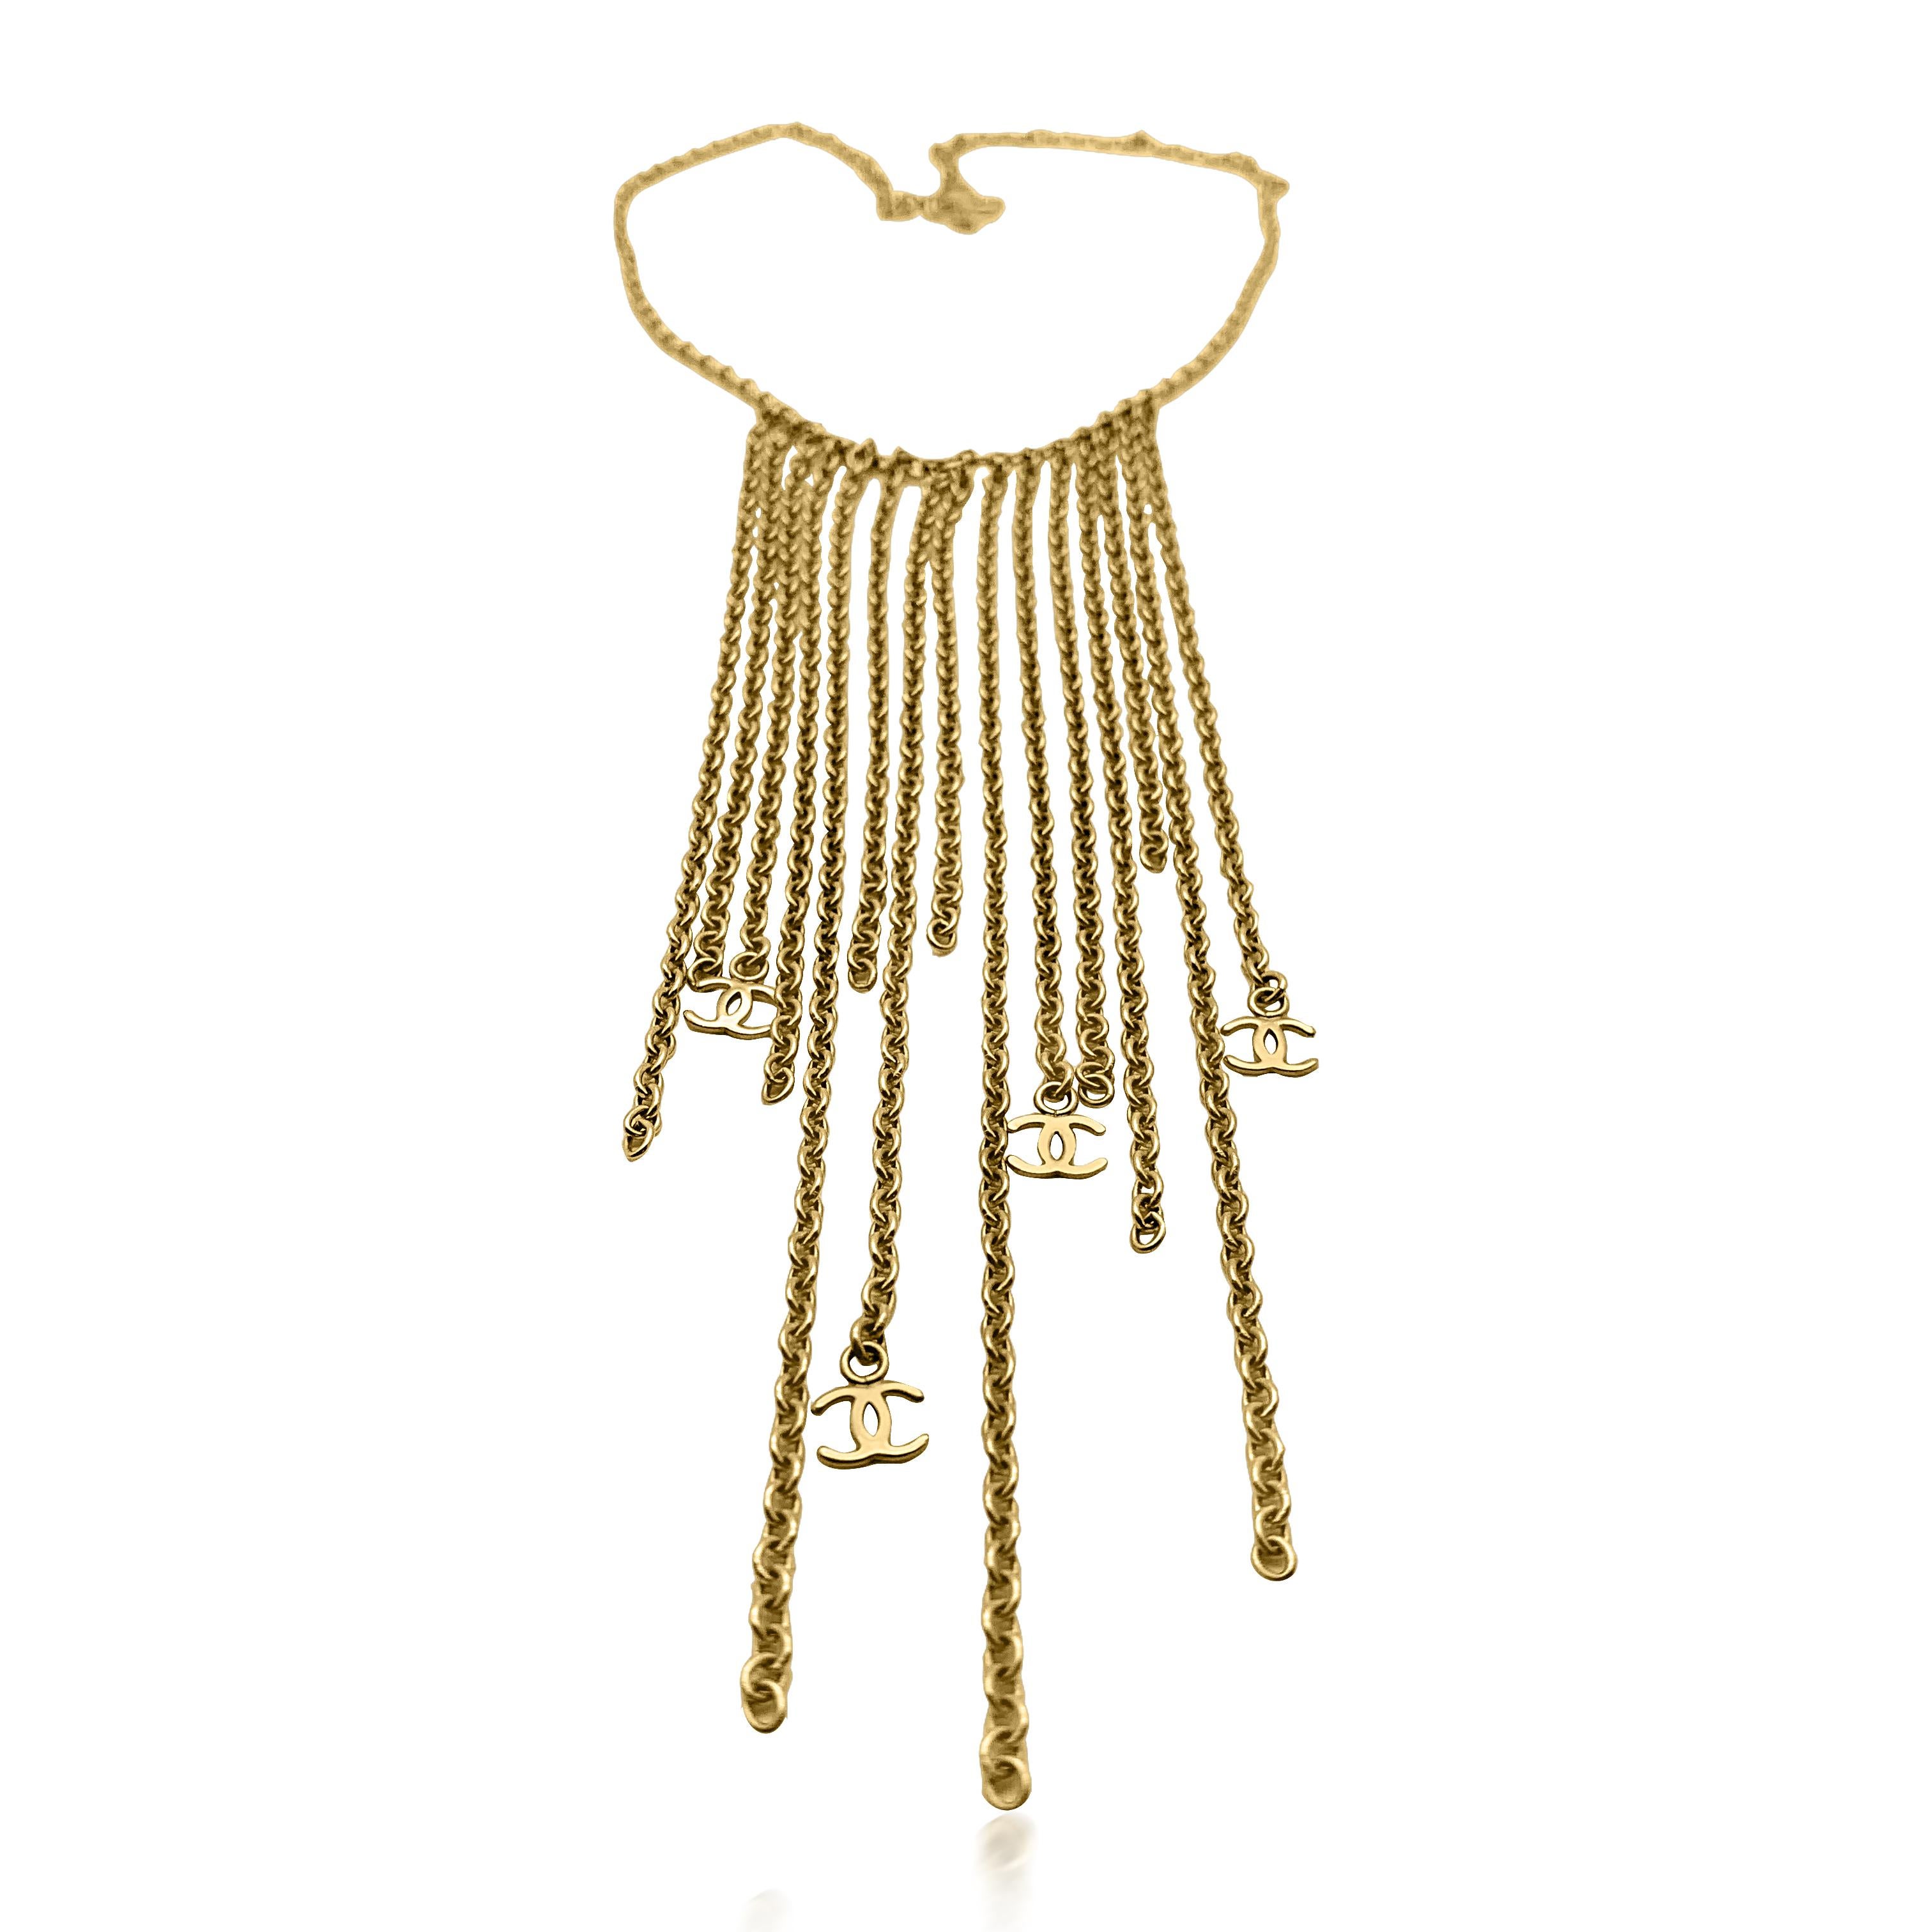 A stunning Vintage Chanel Fringe Logo Necklace from 2001. Crafted in gold plated metal. Featuring no less than fifteen long chain drops creating a fringe style bib effect and finished to perfection with four iconic CC logo charms. In very good